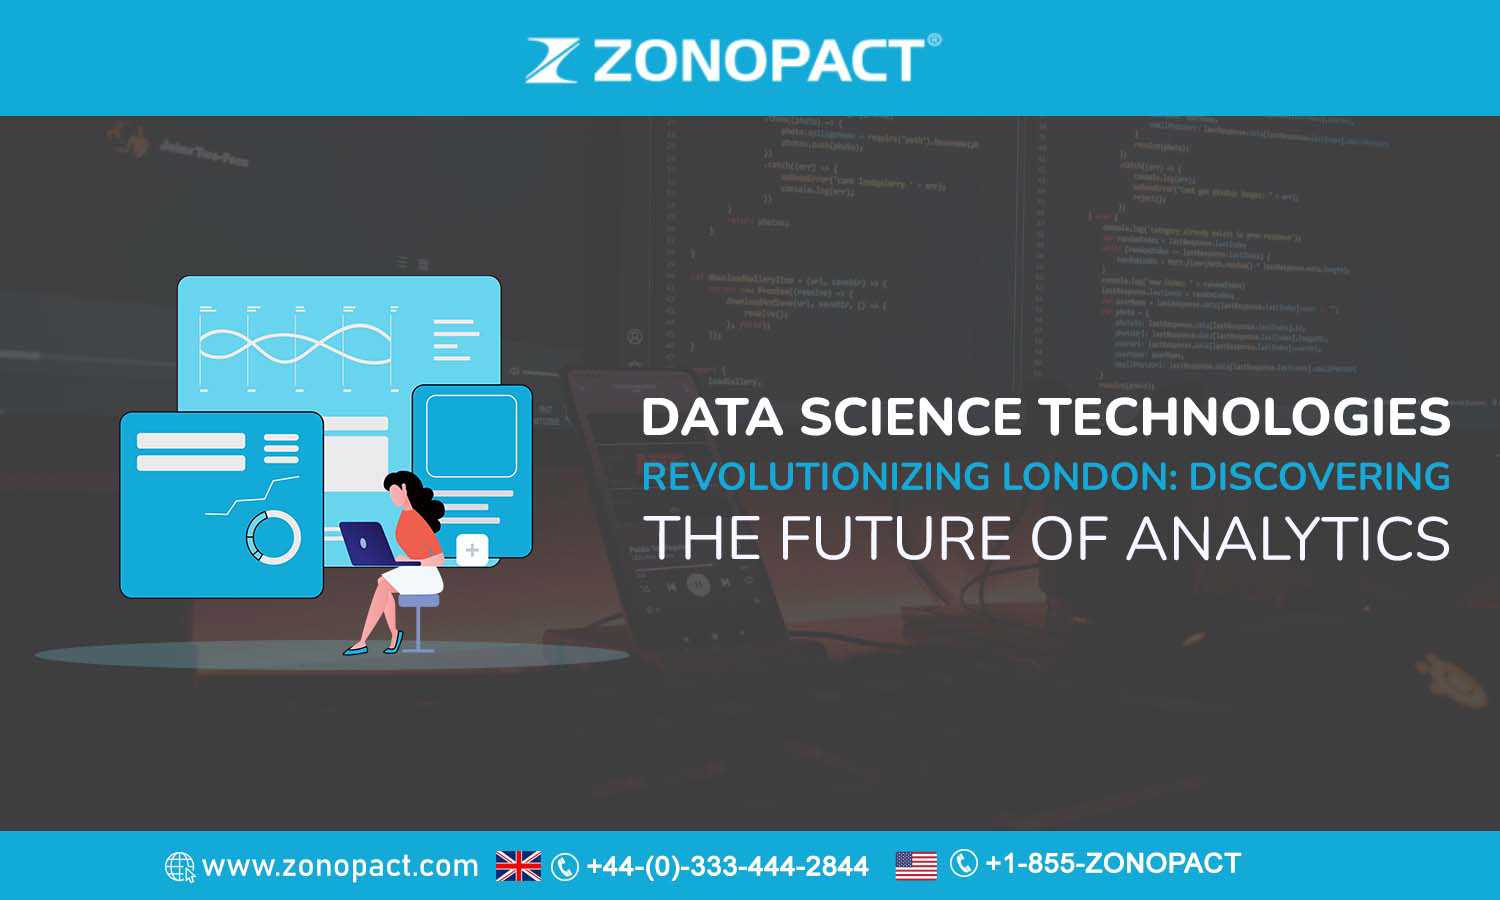 Data Science Technologies Revolutionizing London Discovering the Future of Analytics